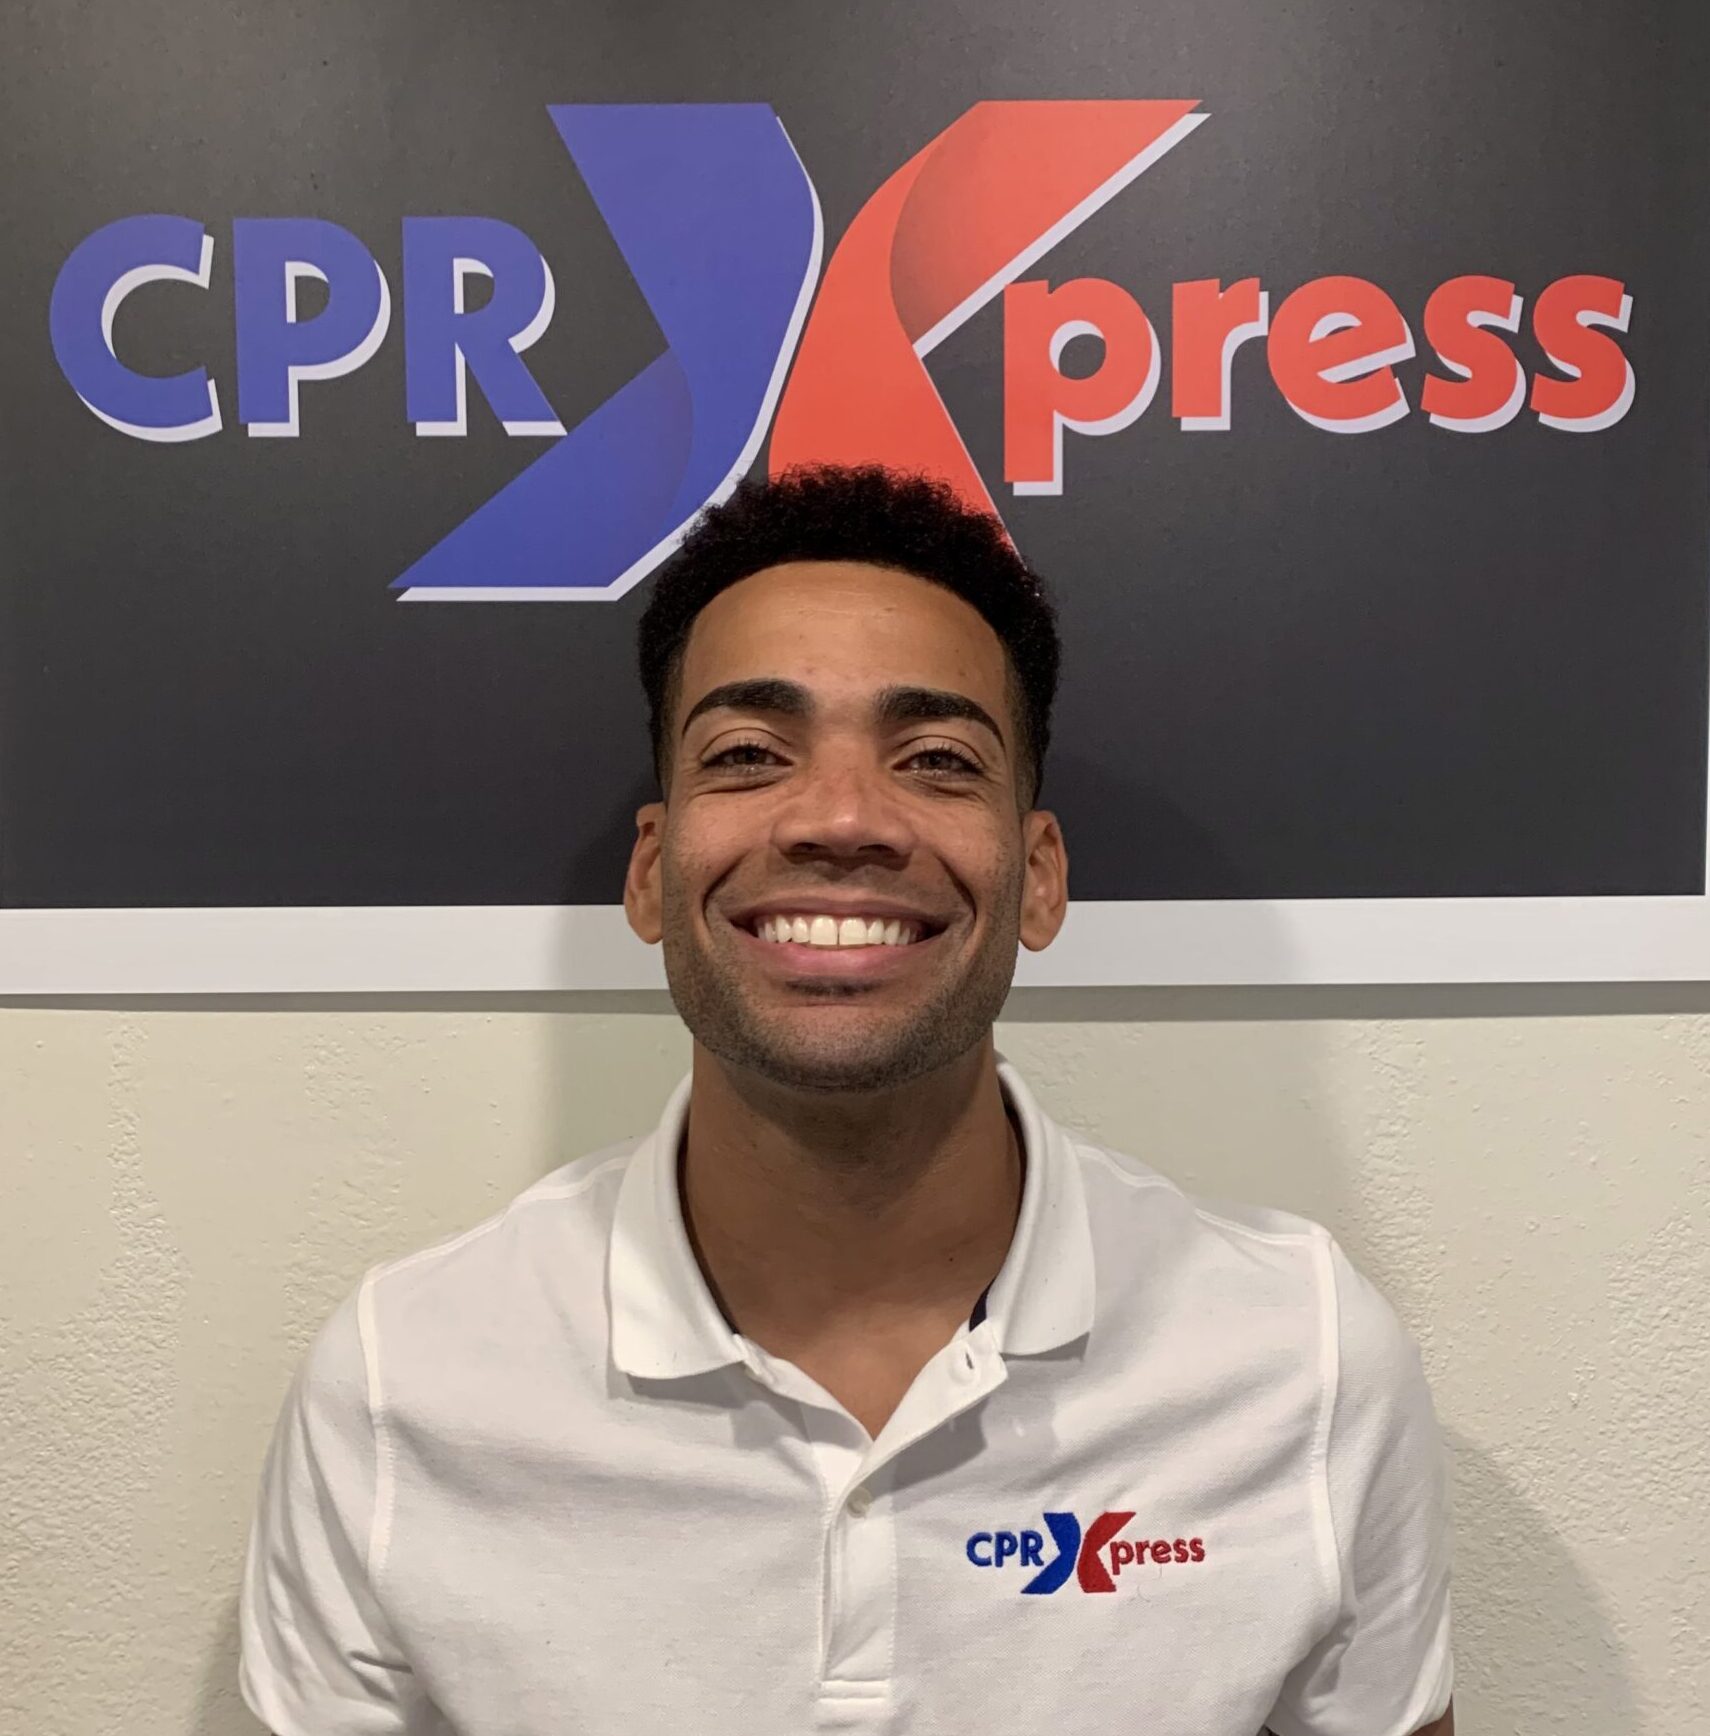 cpr xpress